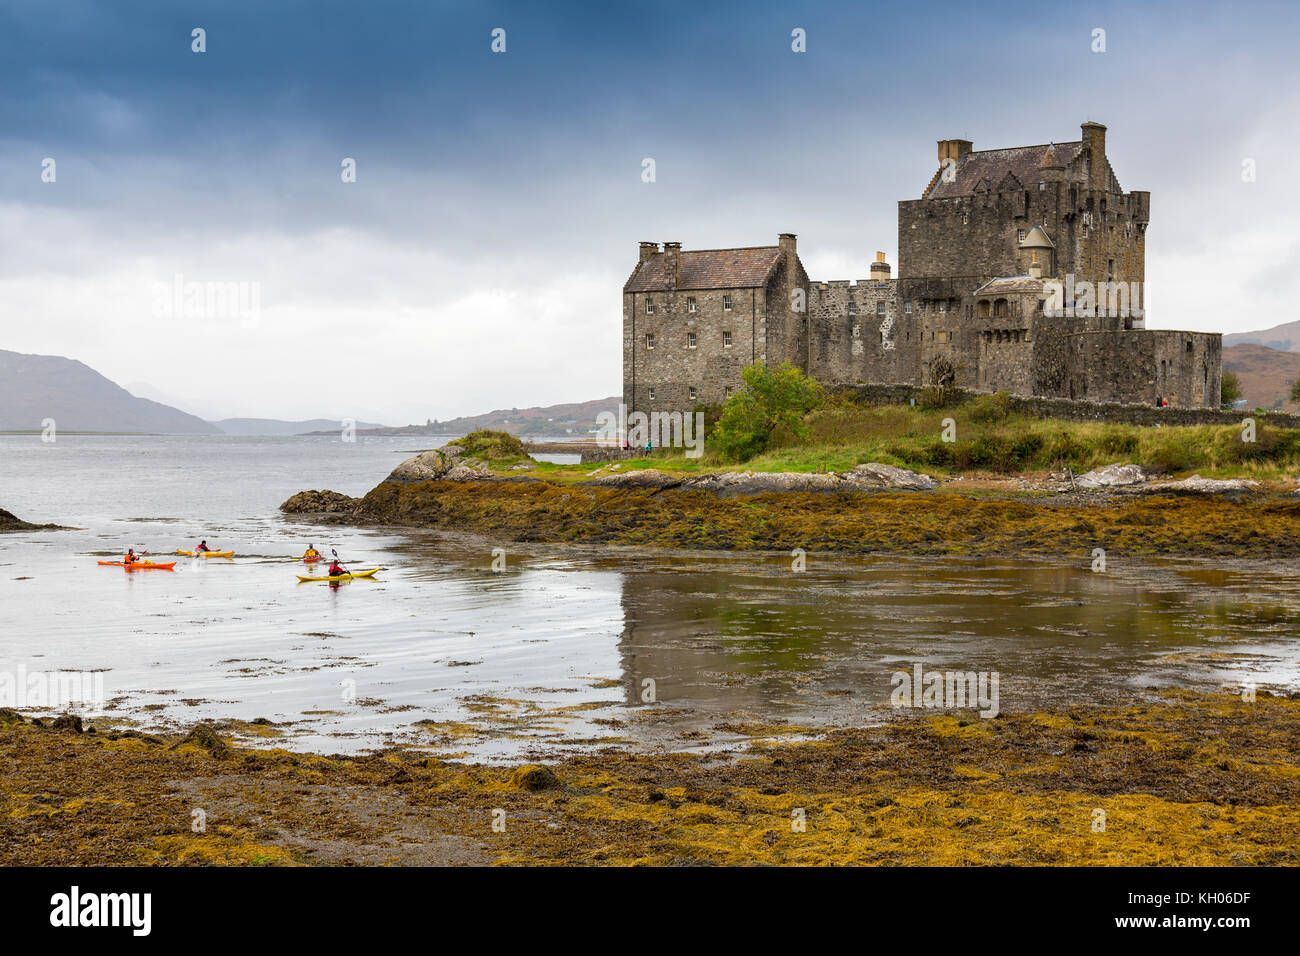 Sea kayakers at Eilean Donan, a 13th century castle on an island at the junction of Lochs Duich, Long and Alsh near Kyle of Lochalsh, Scotland, UK Stock Photo